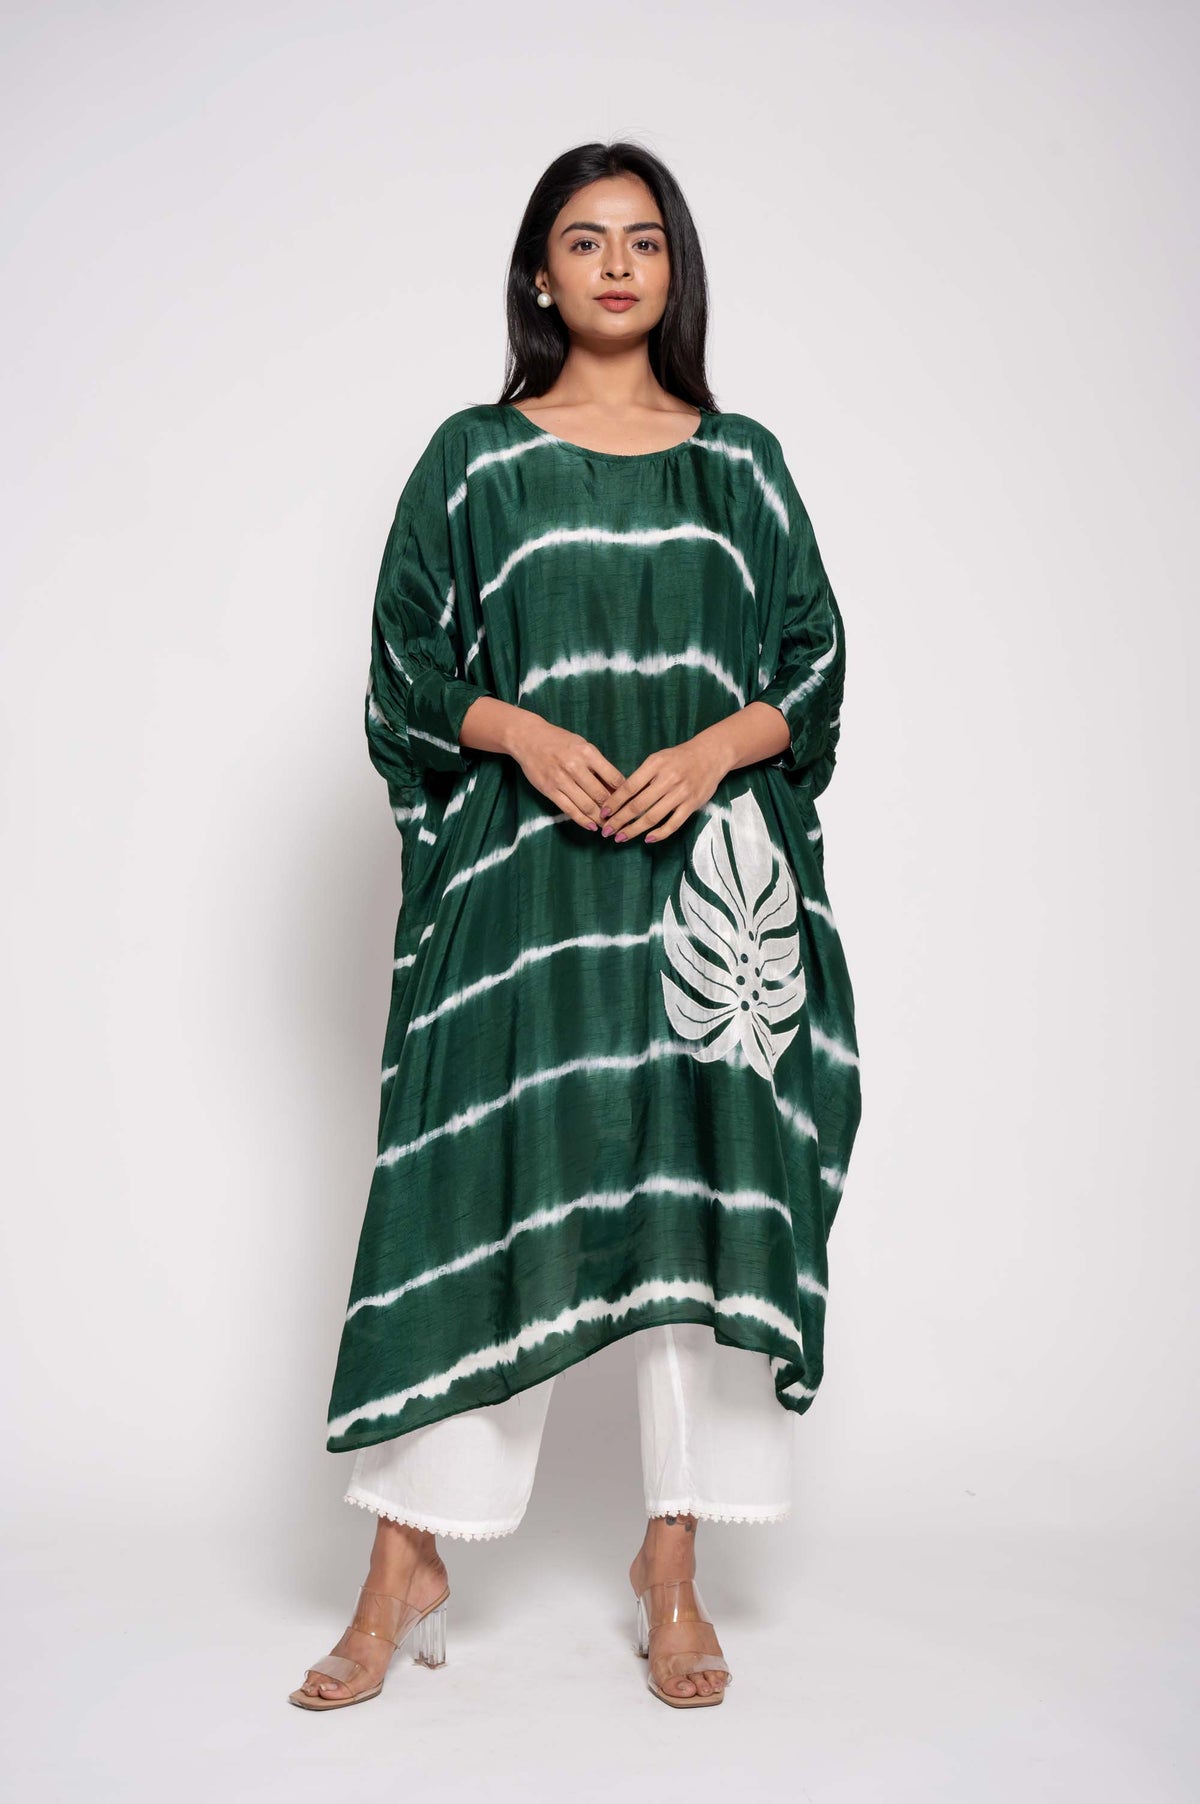 Baggy style Kurtaset with Leaf Applique